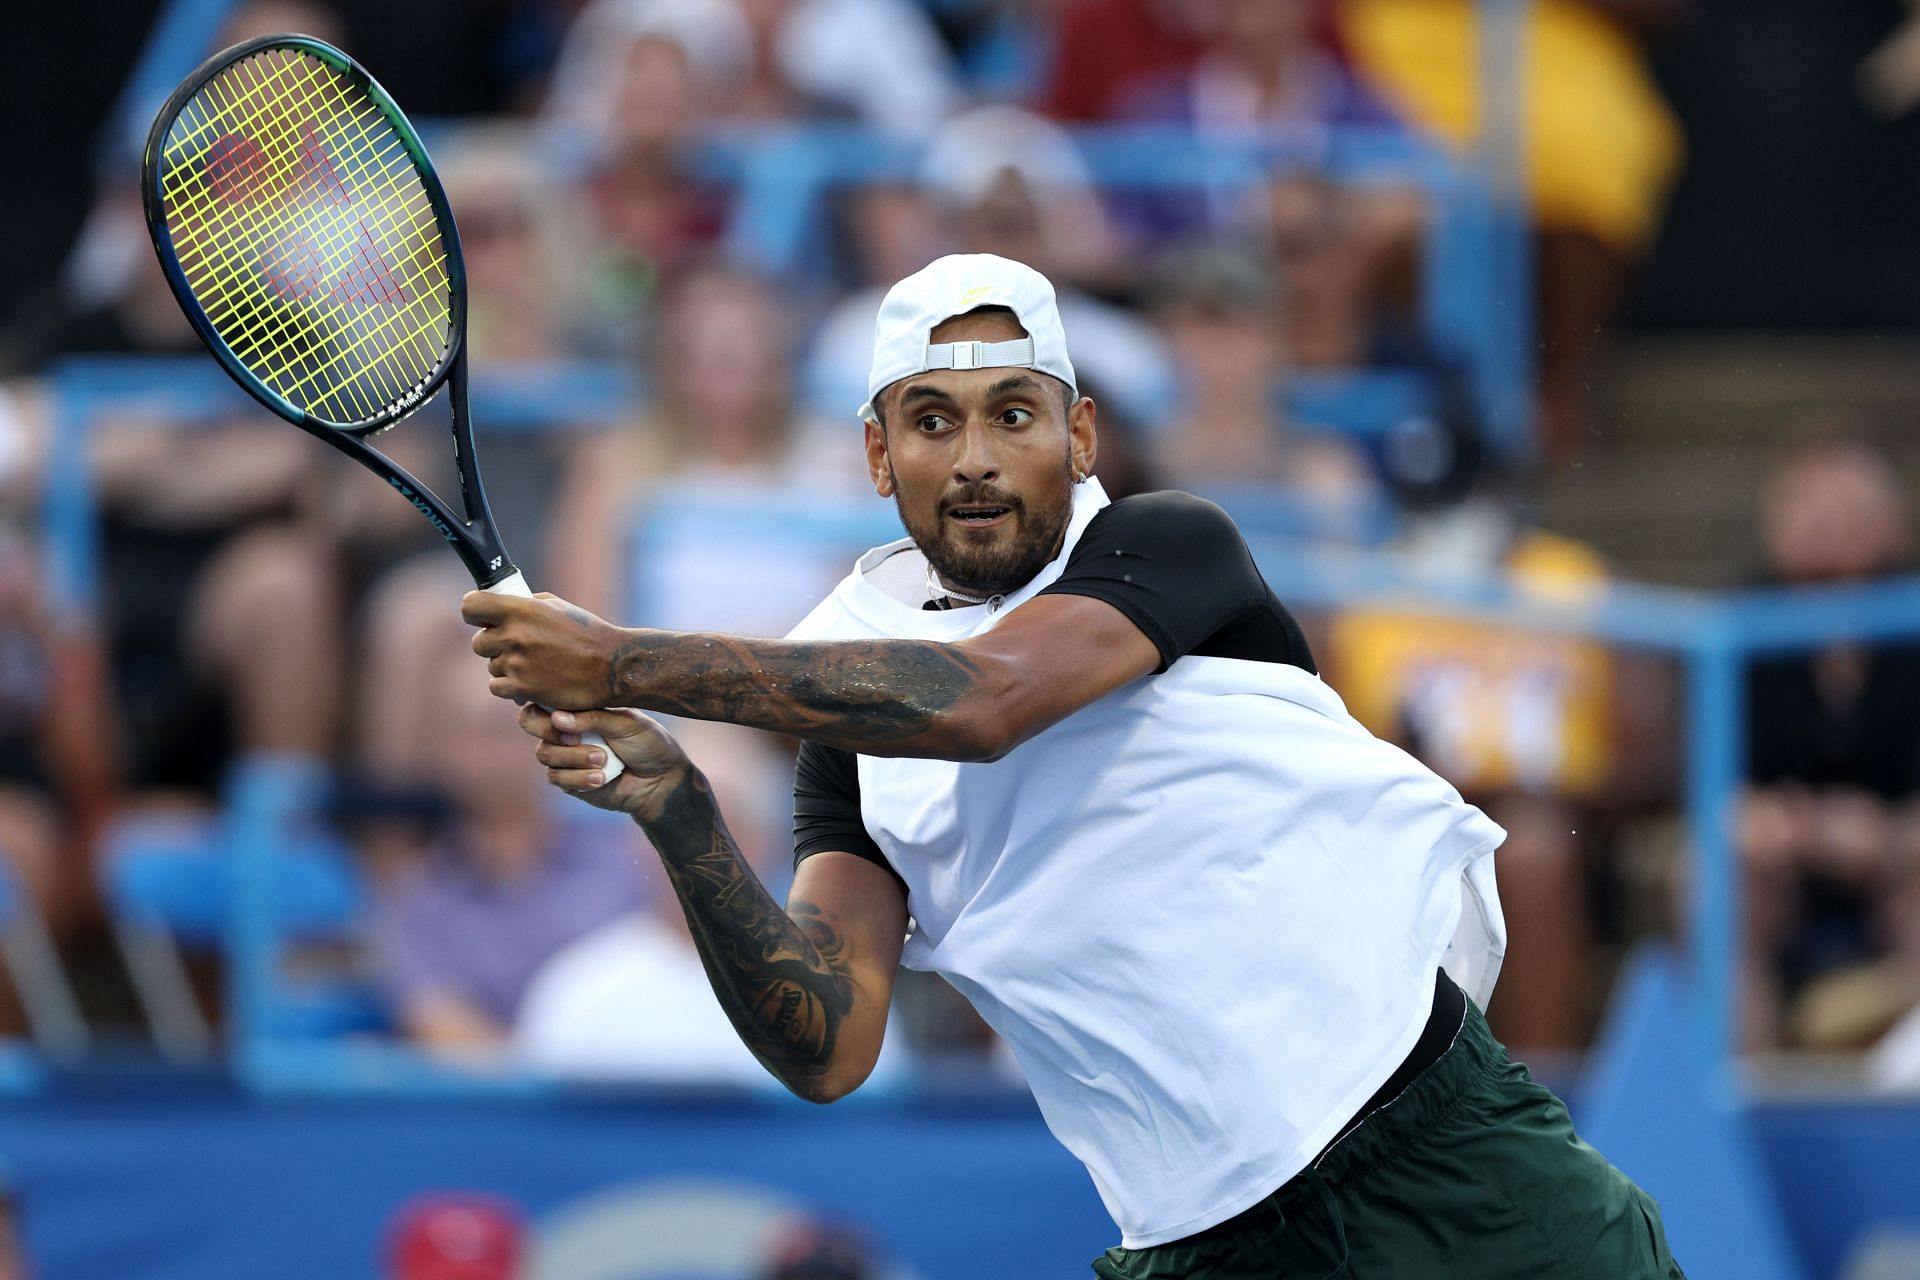 Nick Kyrgios eased past Marcos Giron at the Citi Open